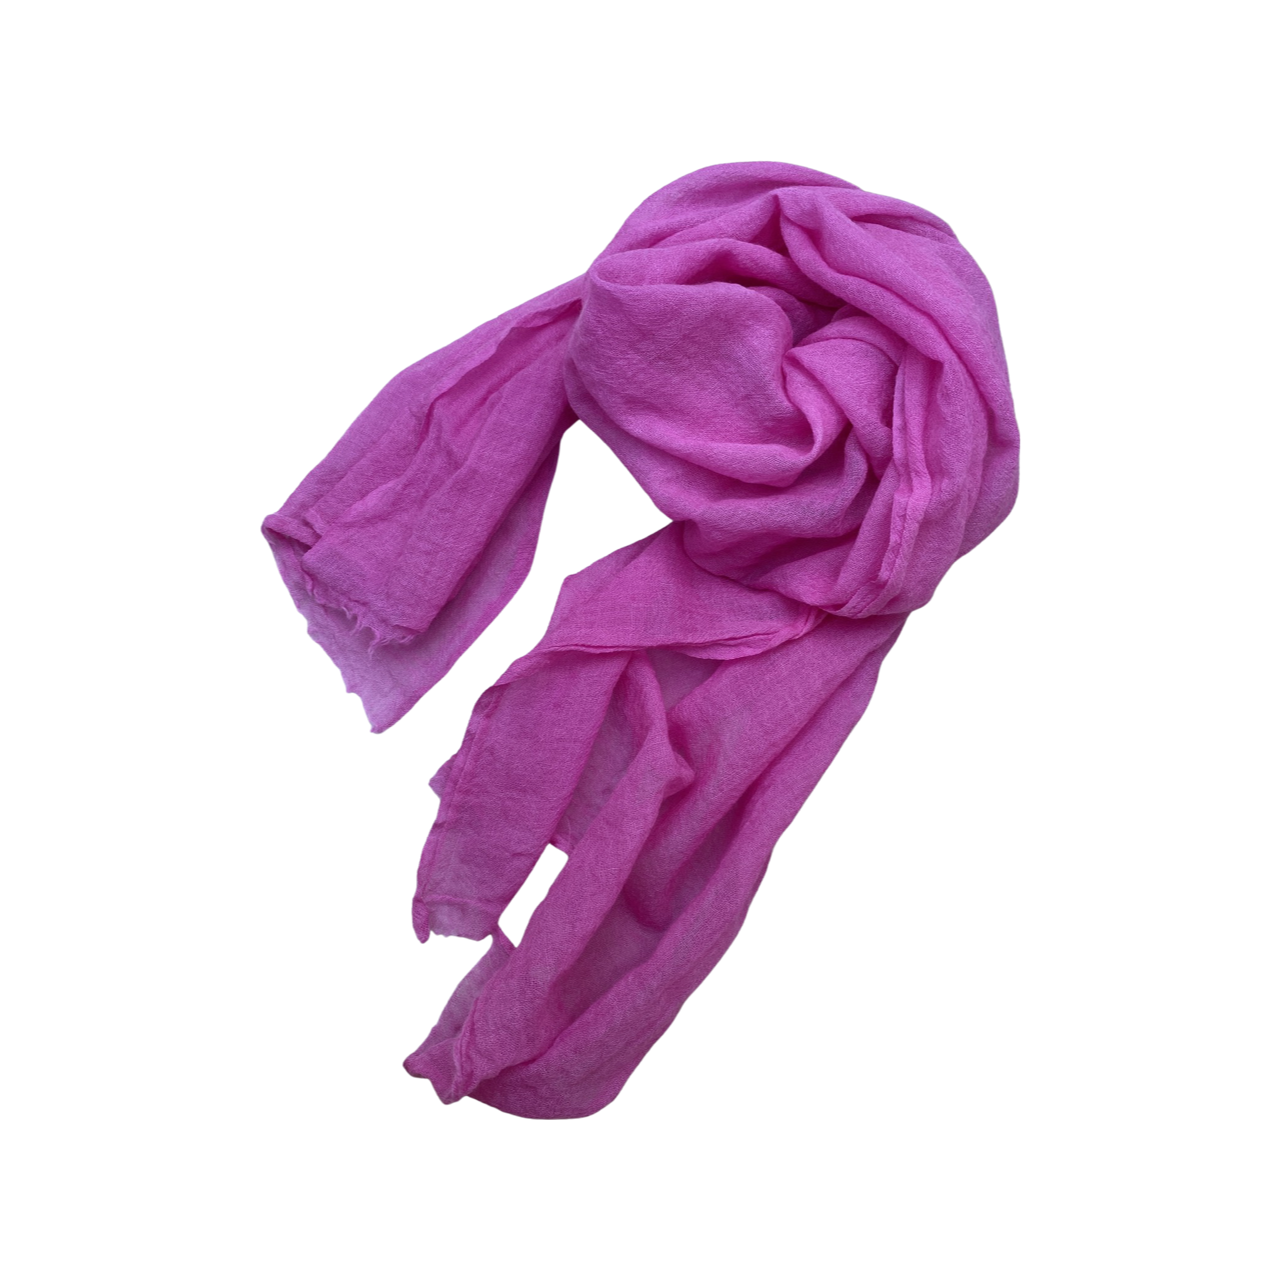 One-of-a-Kind Hand-Dyed Wool Gauze Scarf in Electric Orchid by 1 Life - Hand-Dyed Wool Scarf for Warm or Cold Weather